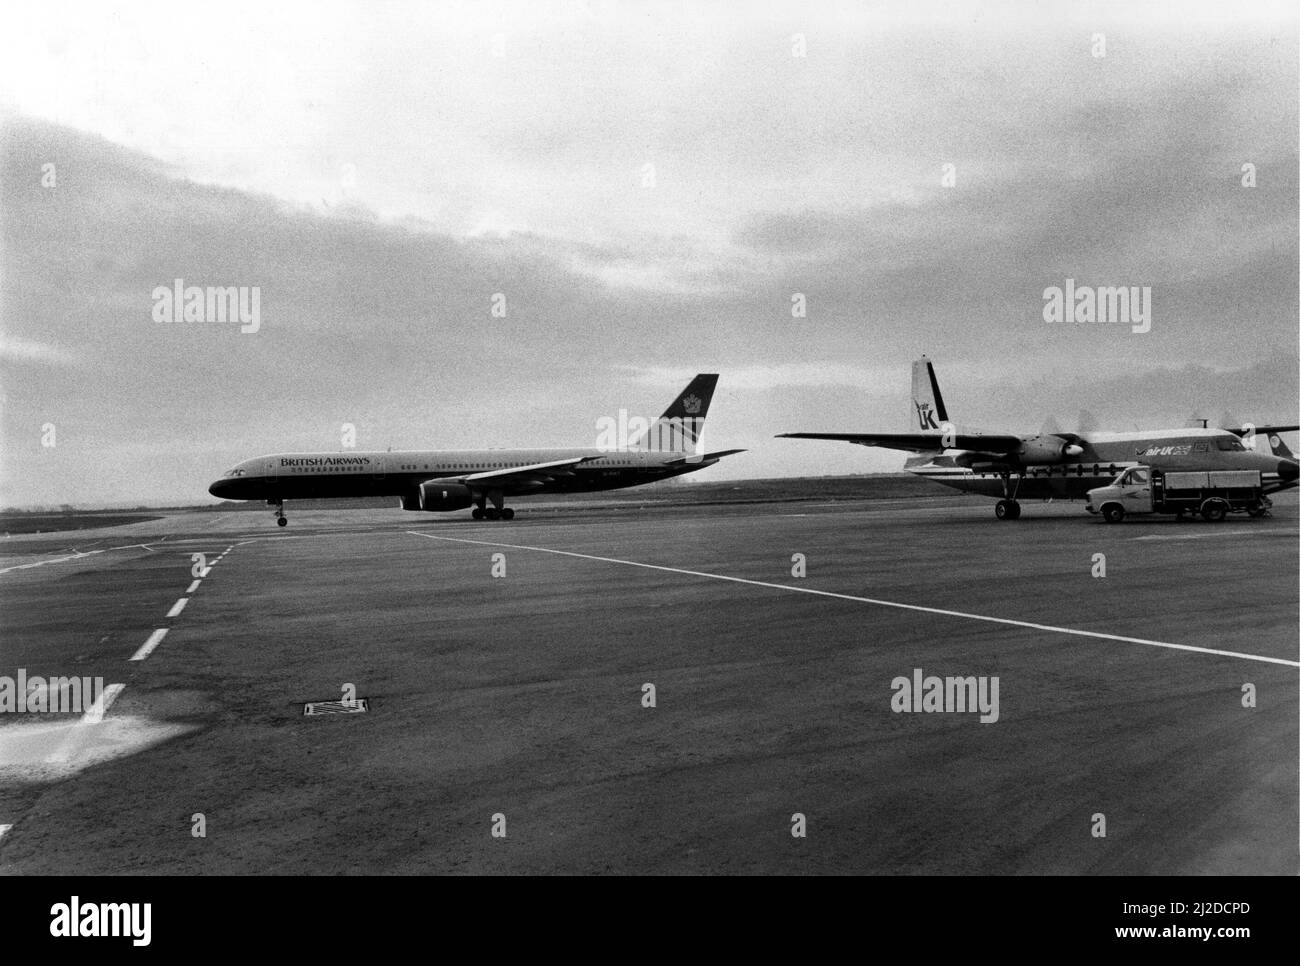 A British Airways 757 taxis past an Air UK Fokker F27 at Heathrow Airport.   17/11/1986 Stock Photo